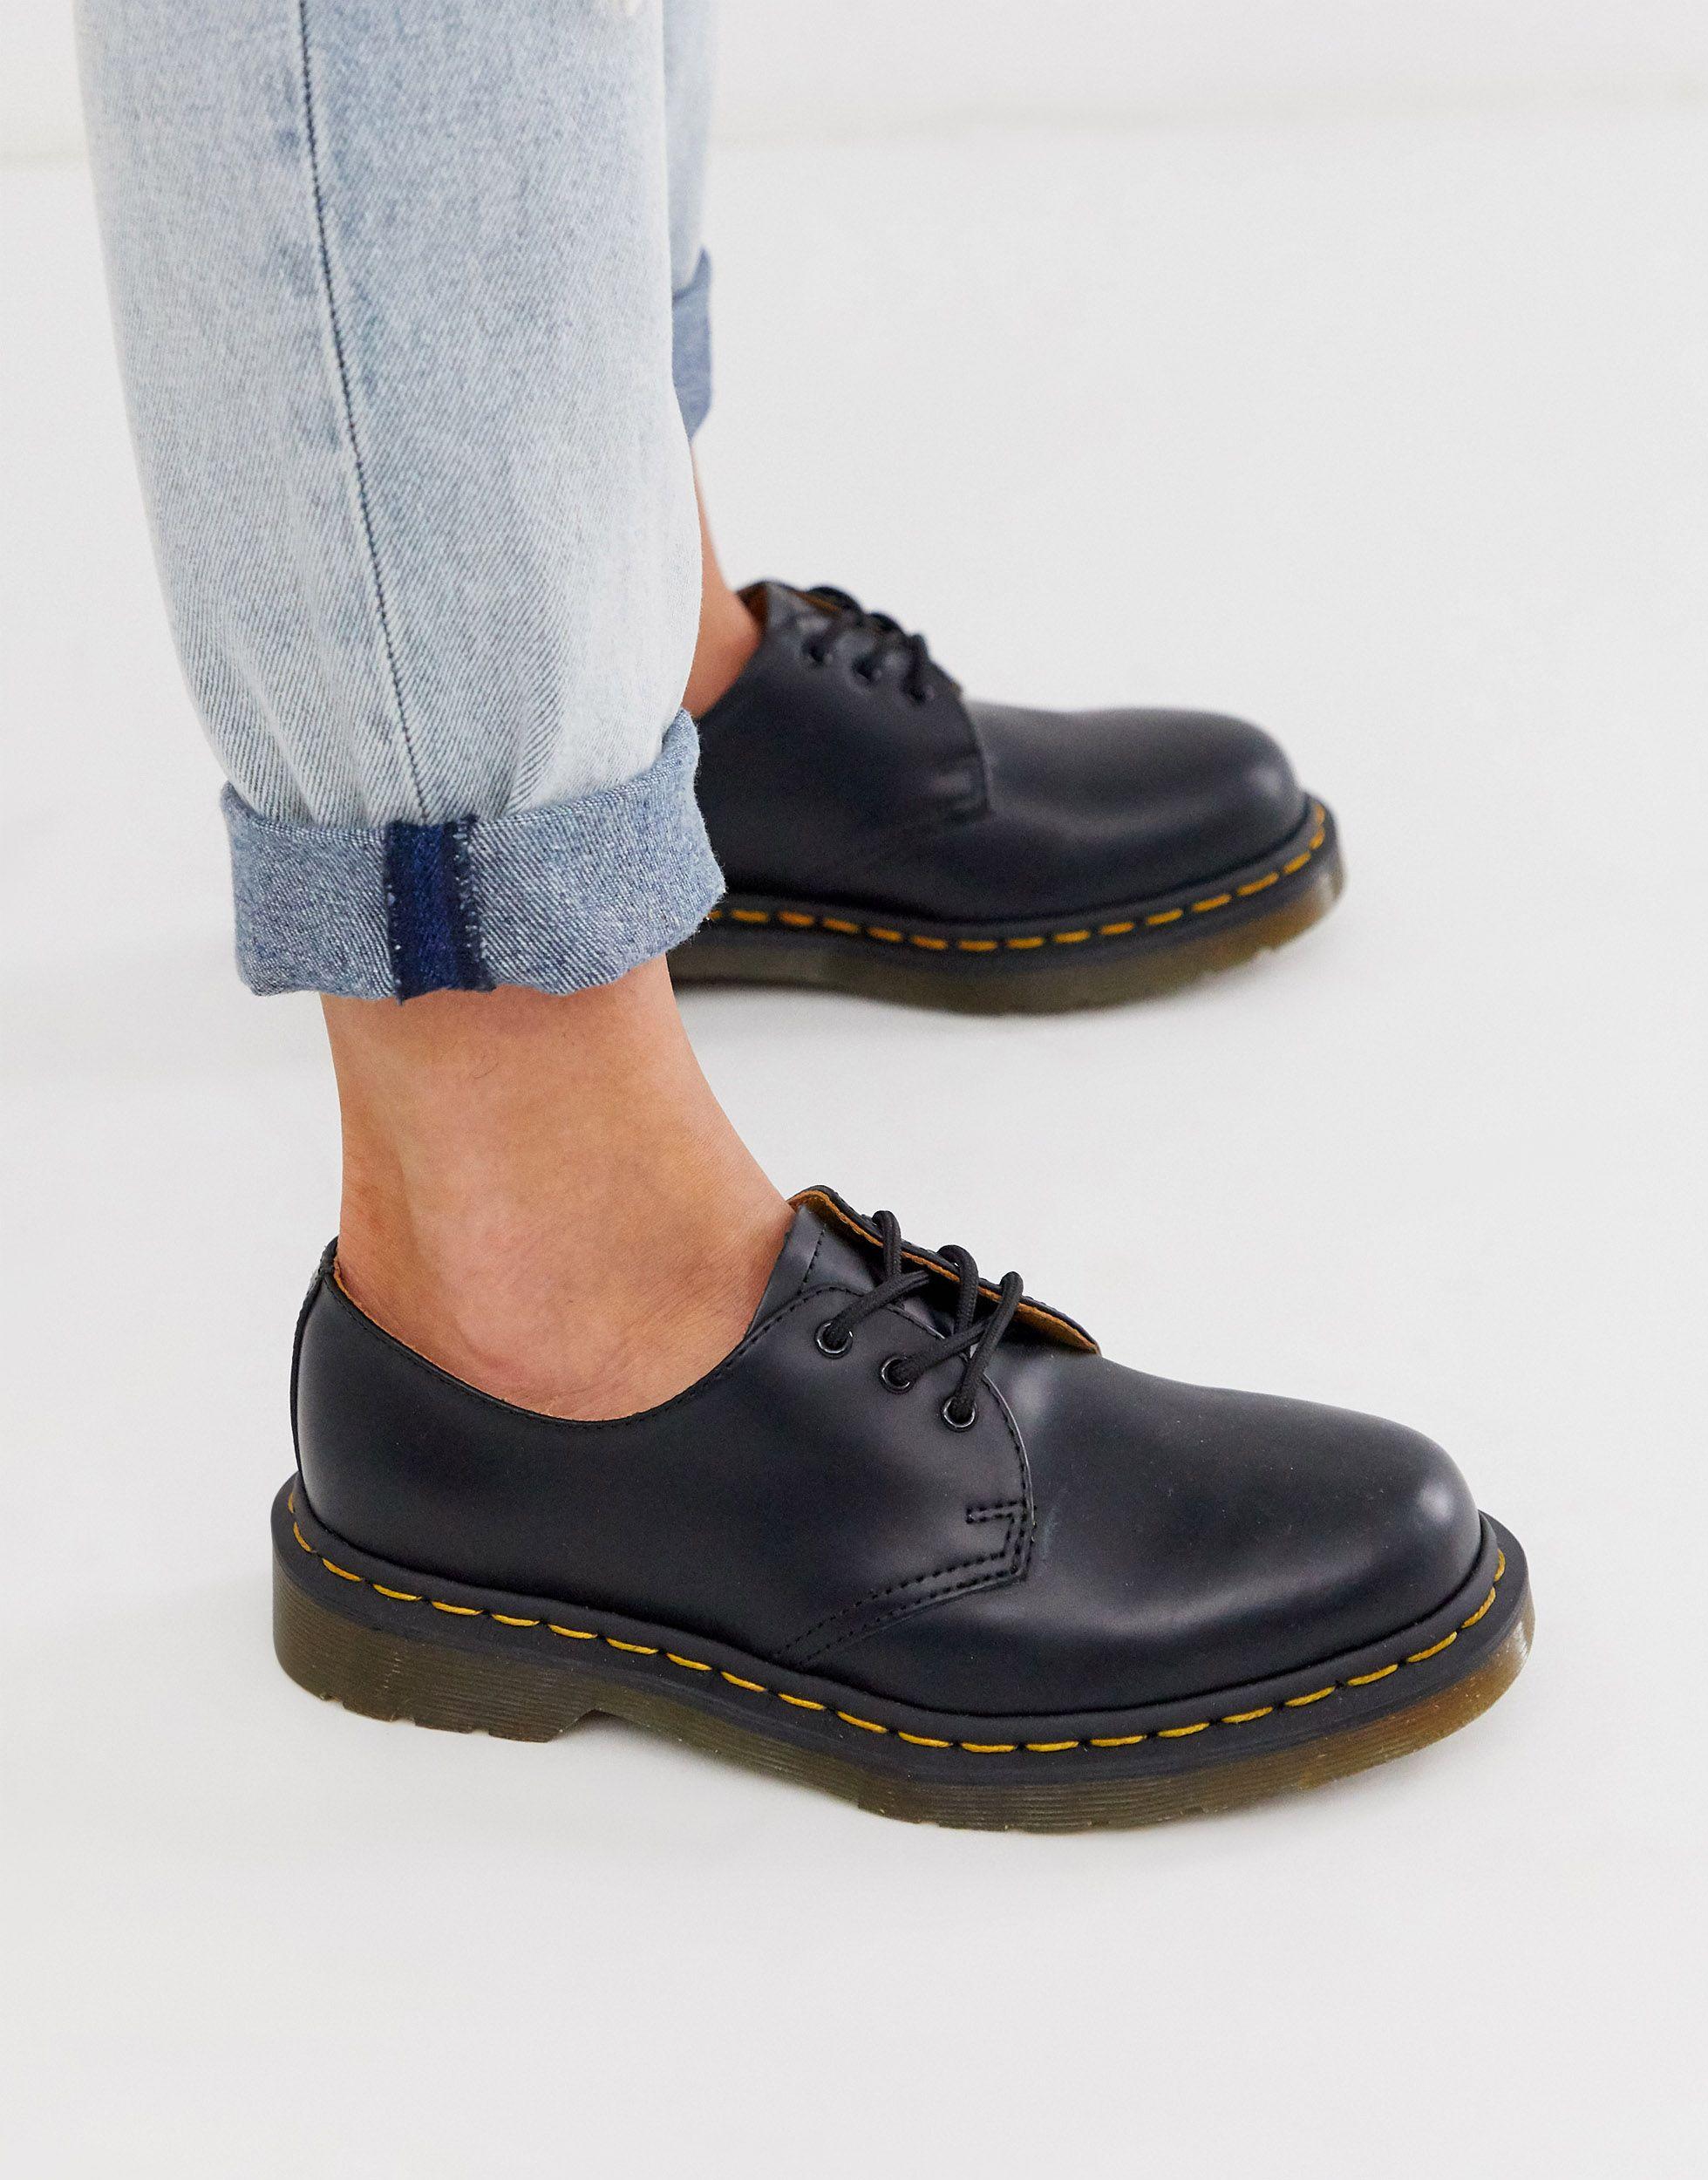 Dr. Martens Leather 1461 3-eye Gibson Flat Shoes in Black - Lyst